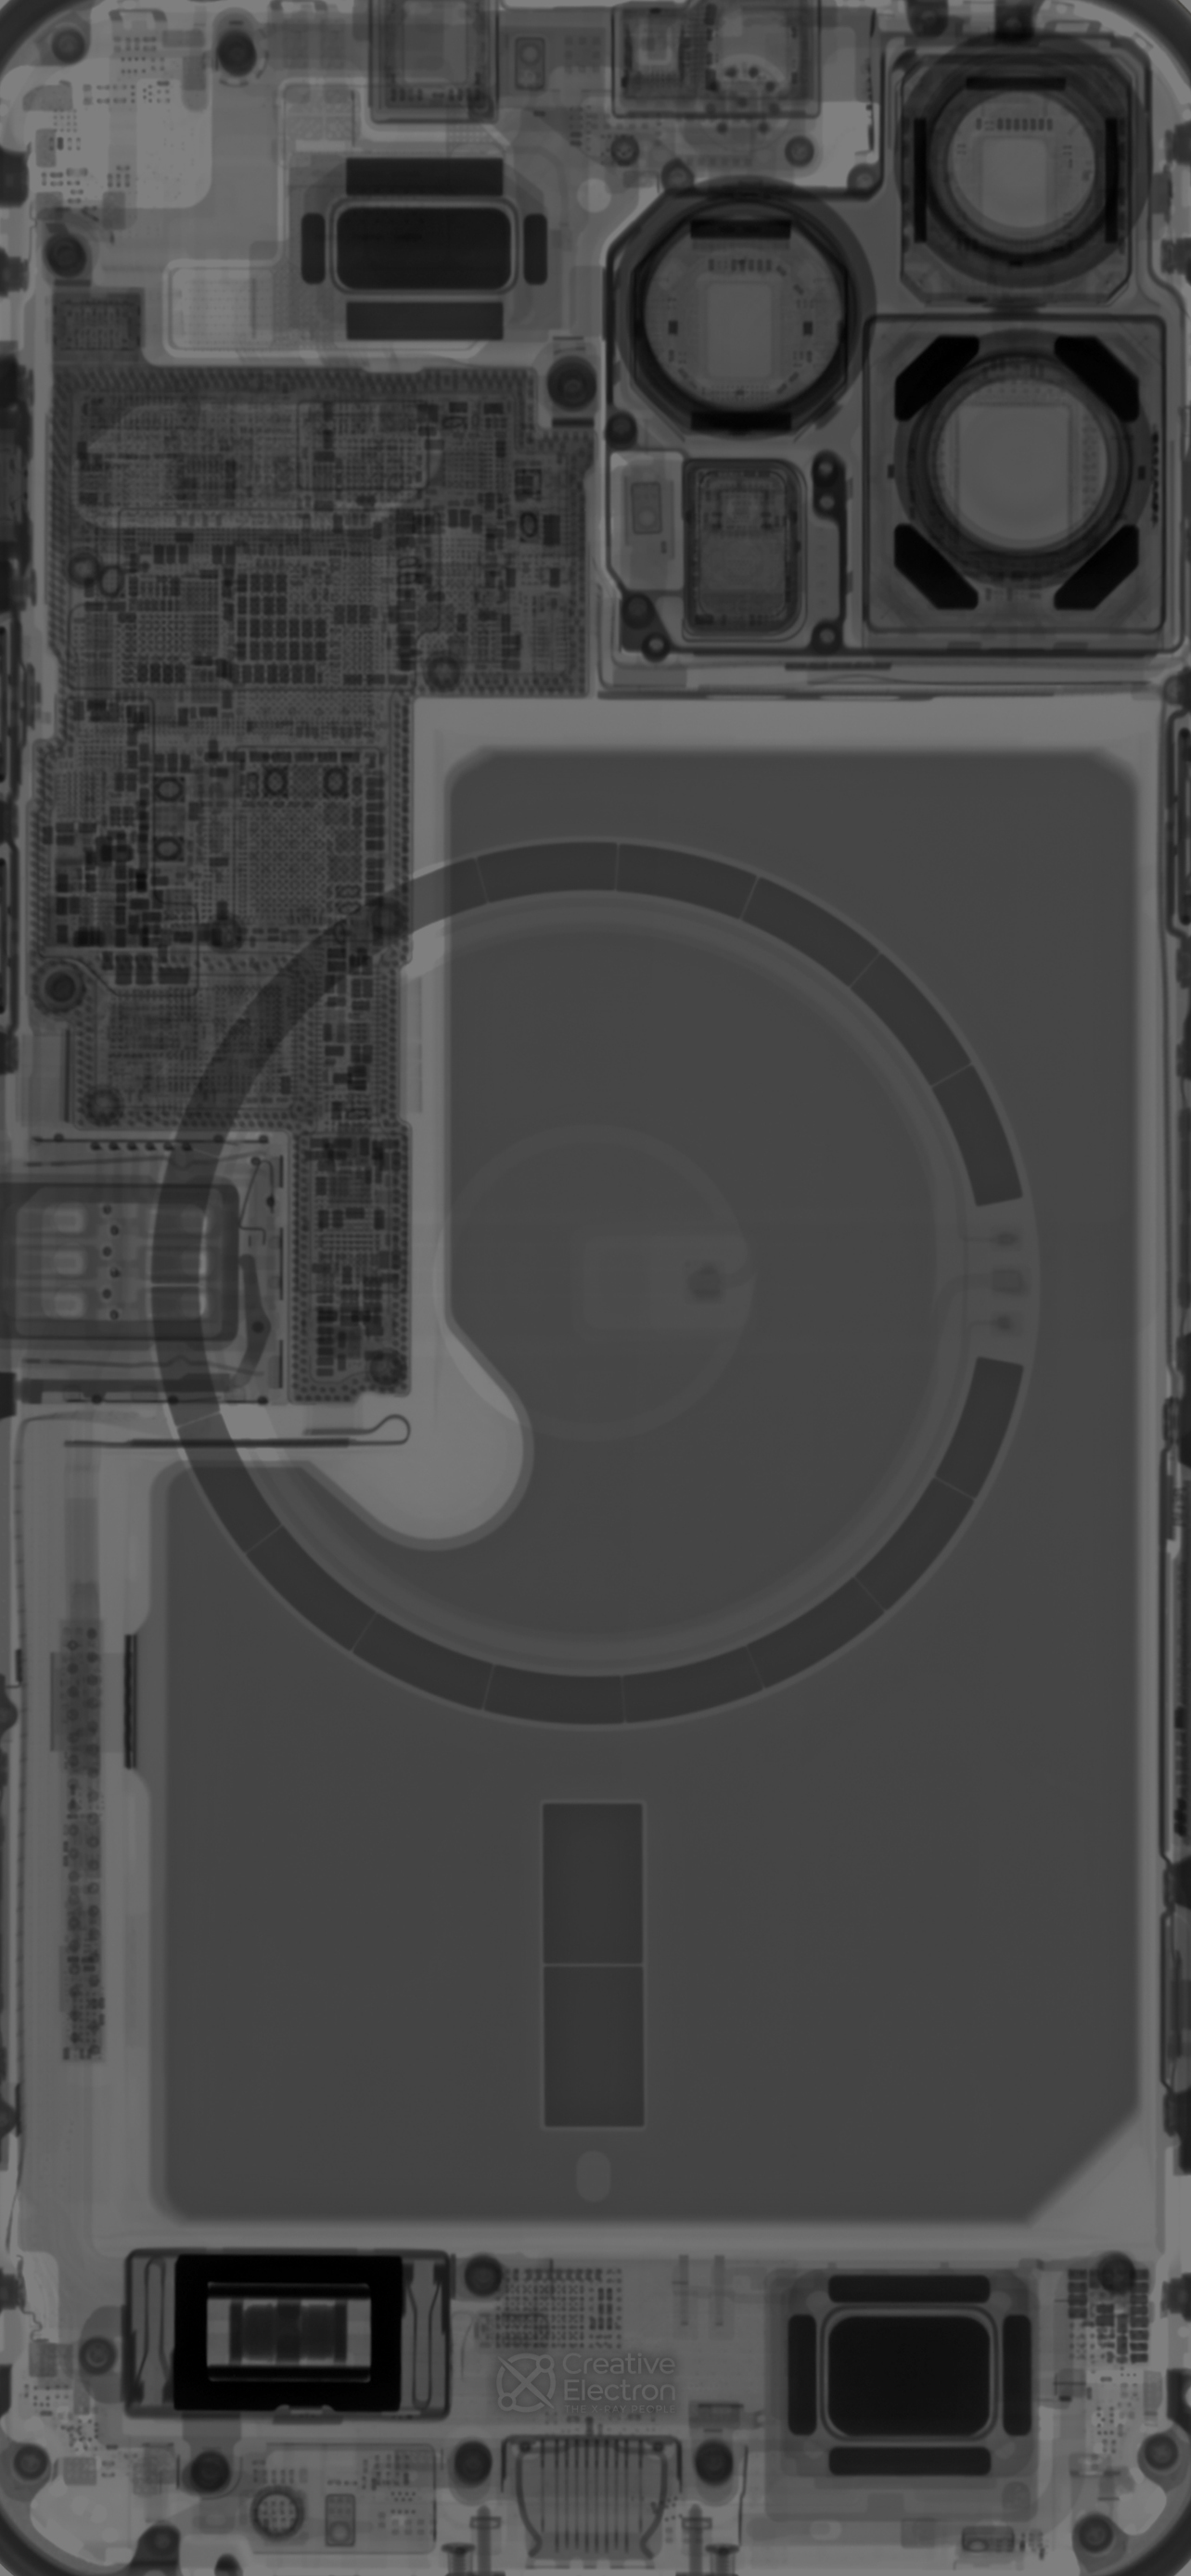 free-download-iphone-13-pro-and-pro-max-teardown-wallpapers-ifixit-news